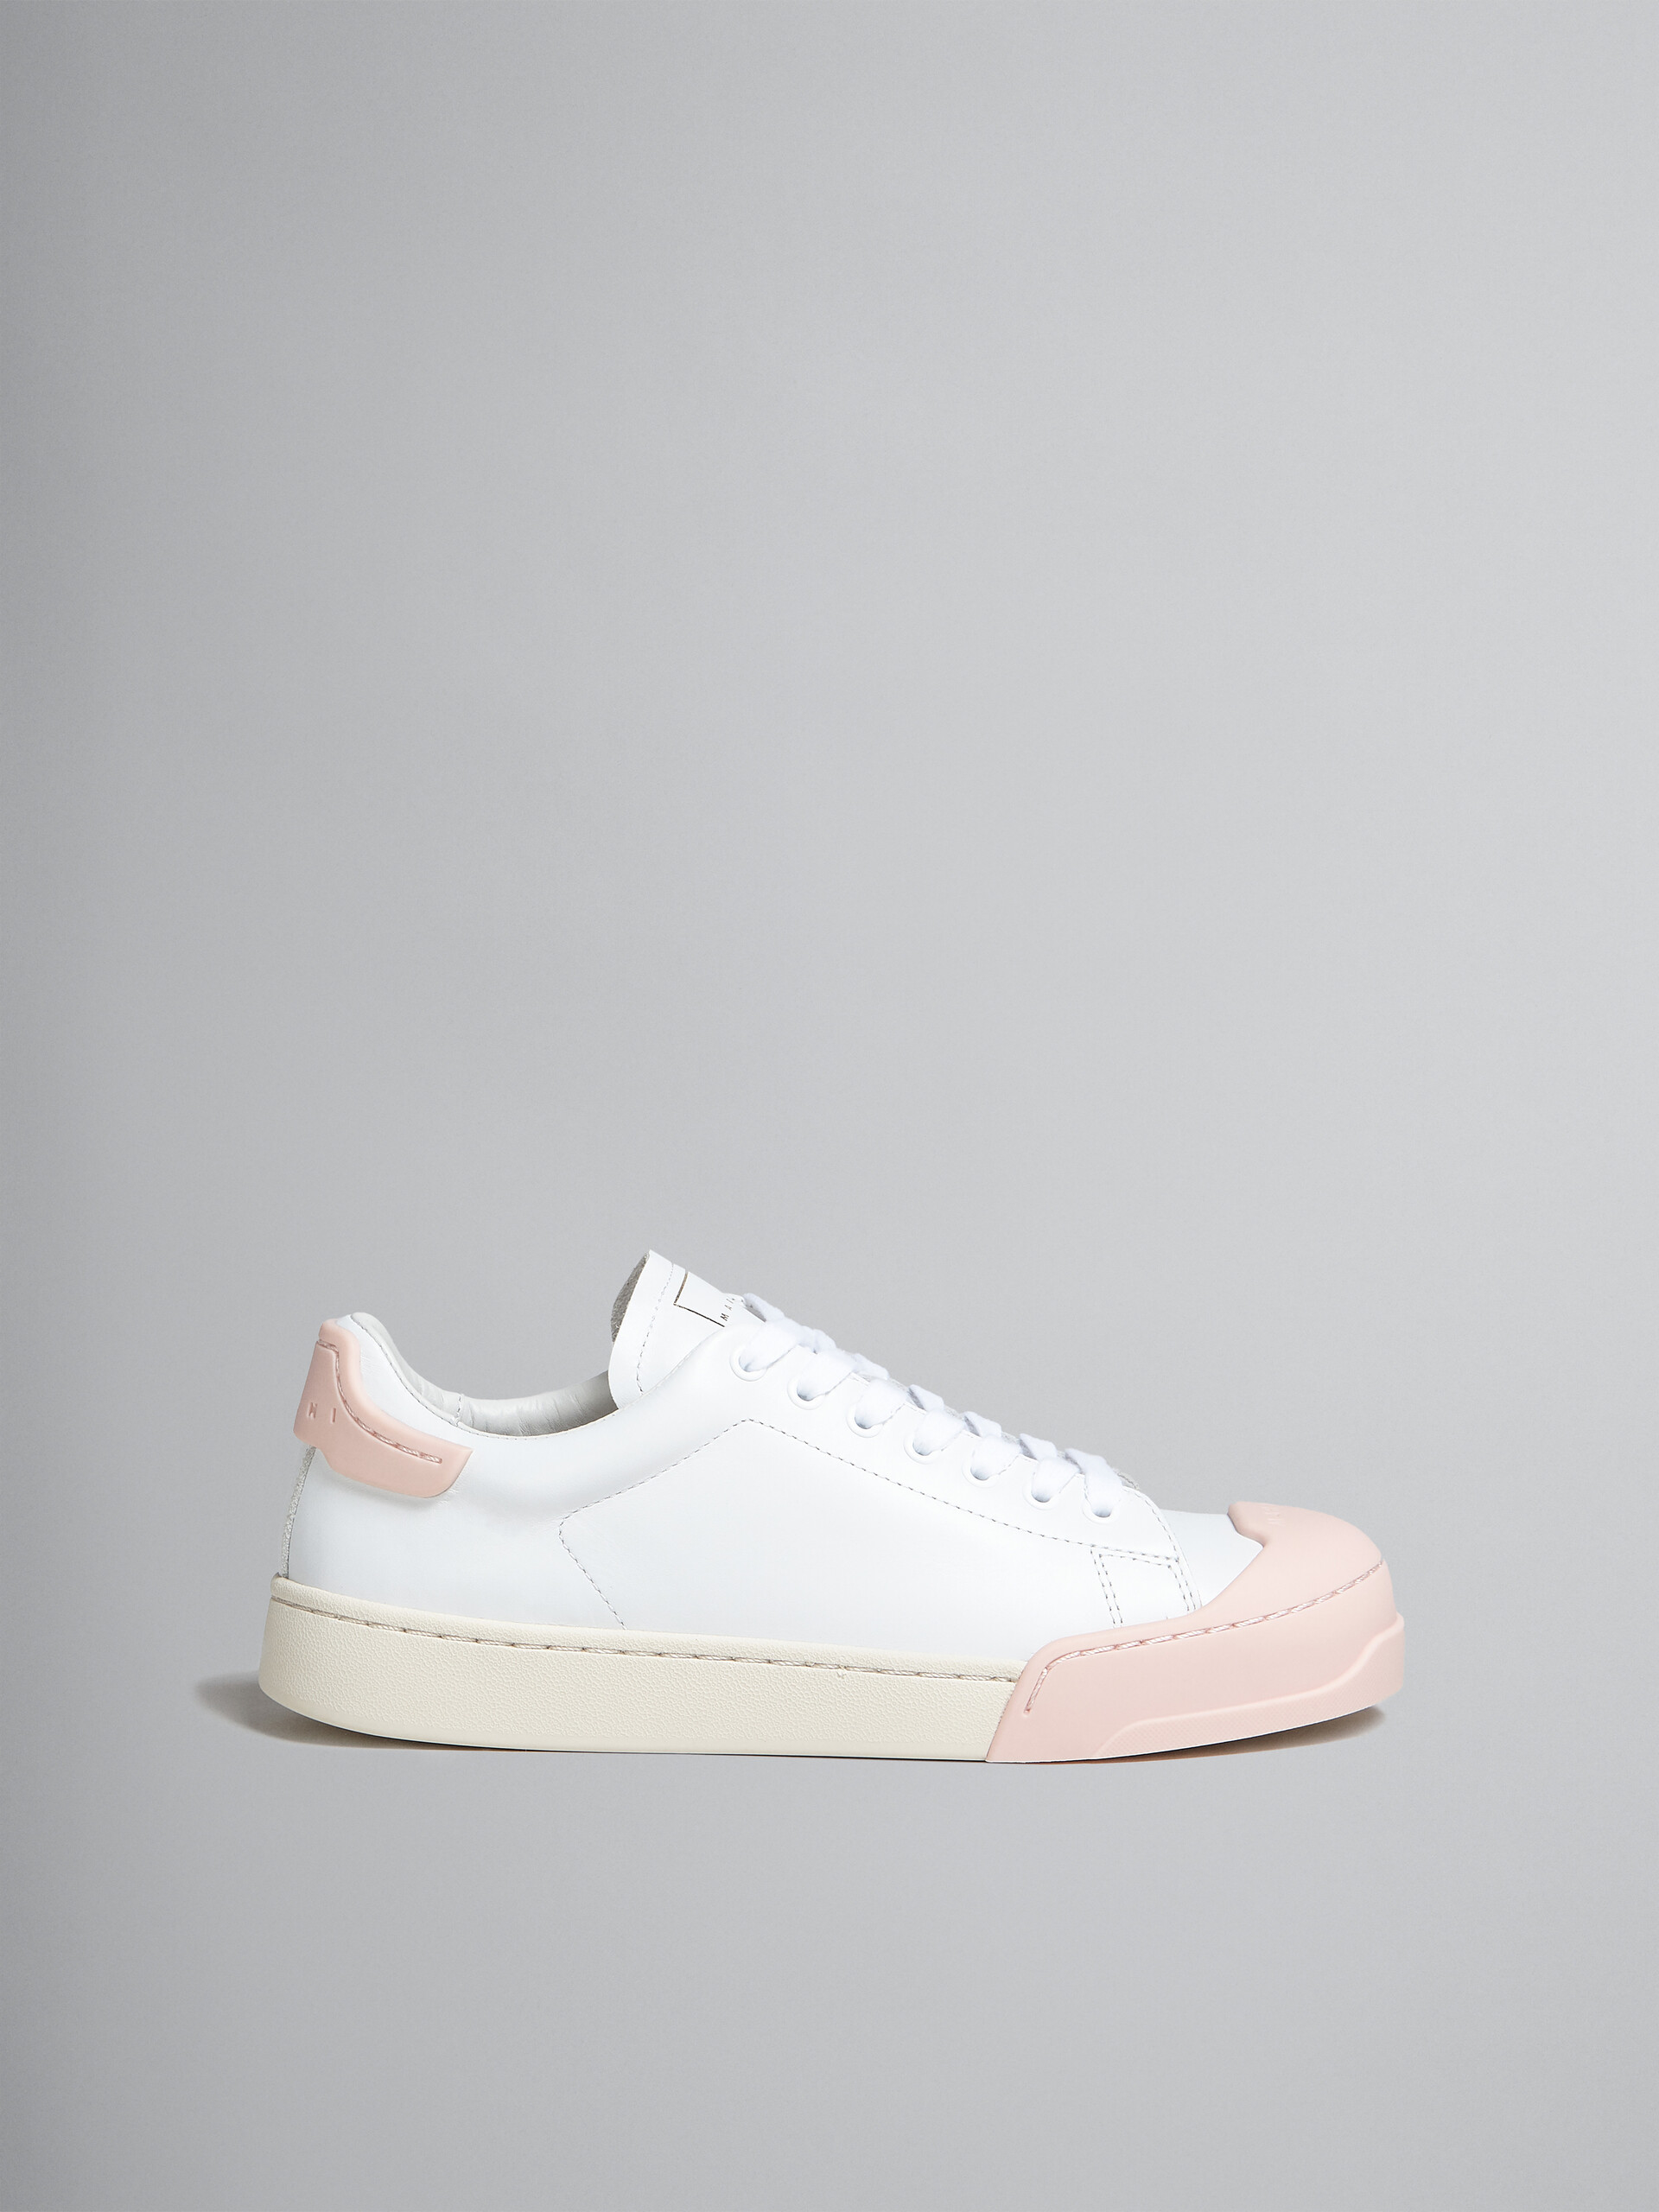 Dada Bumper sneaker in white and pink leather - Sneakers - Image 1